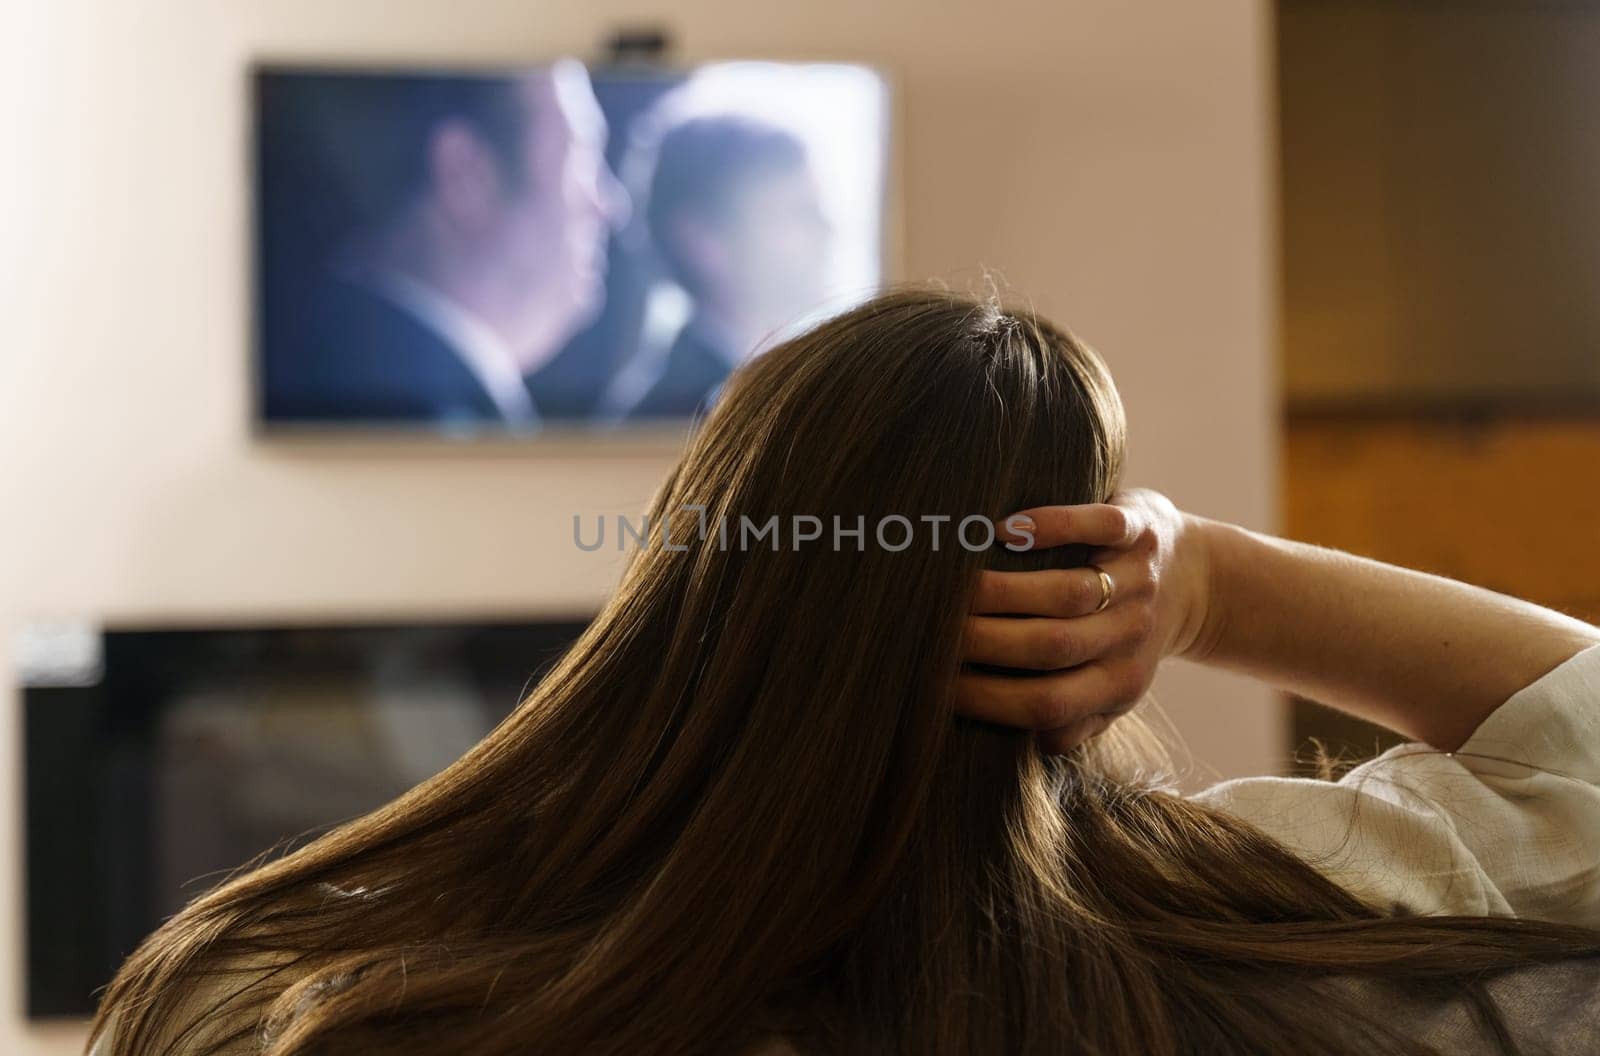 The girl watches TV, sits in the living room at home in the evening, switches TV channels. View over the shoulder, the image is blurry.